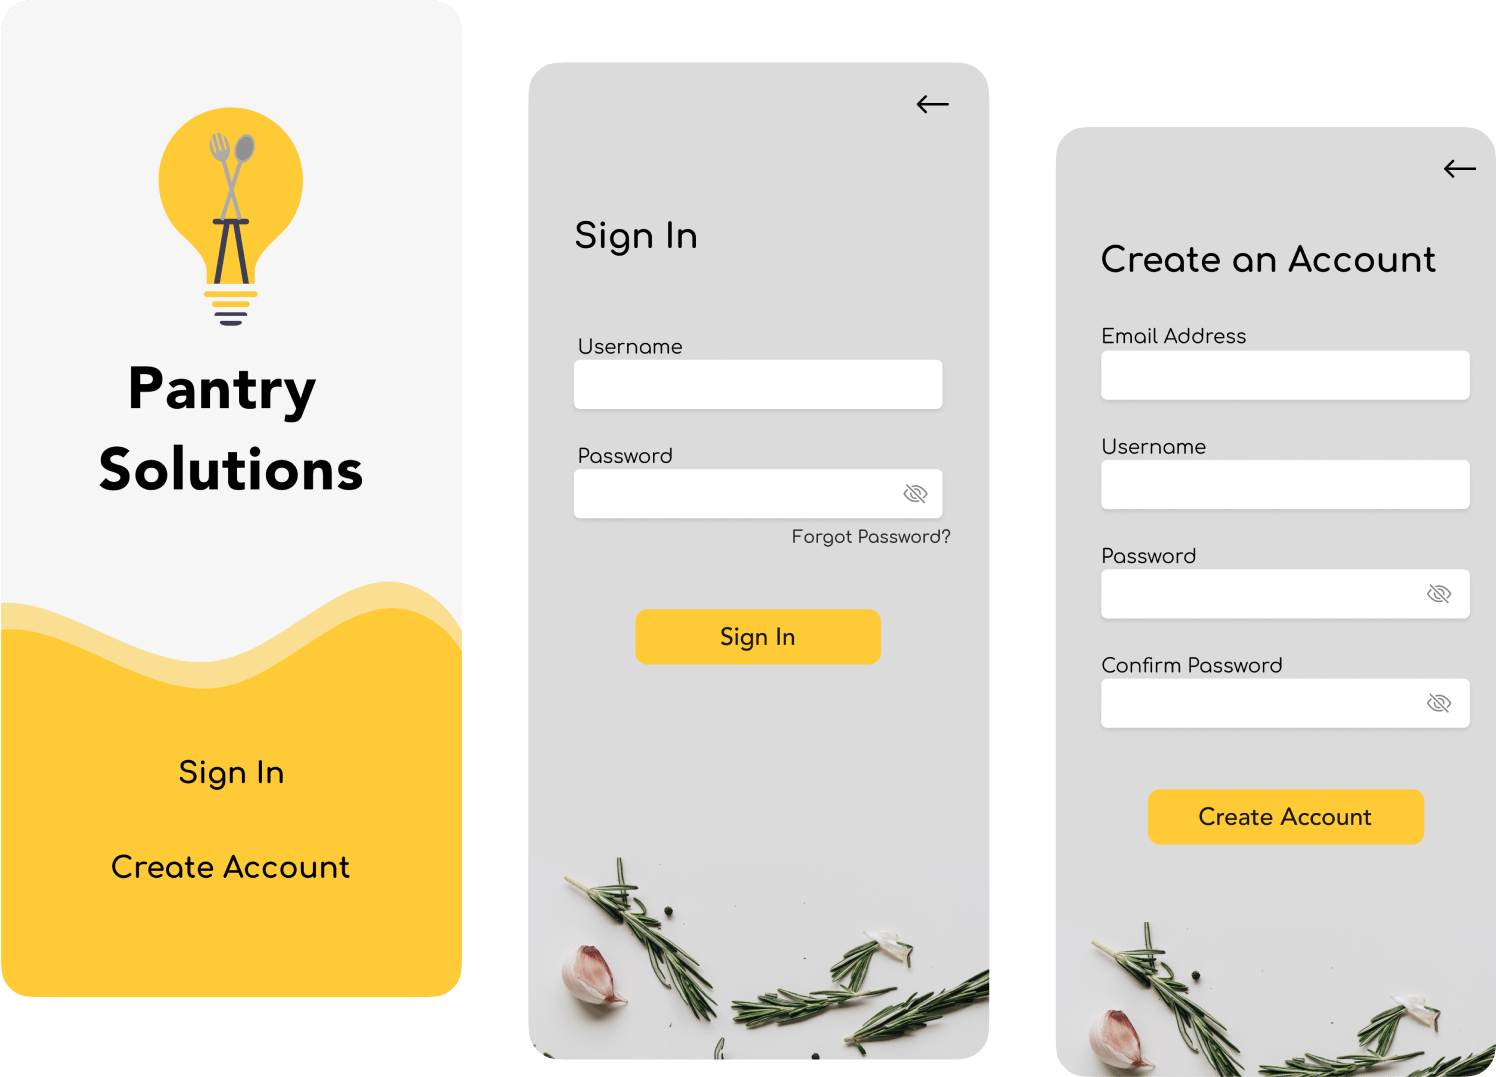 Pantry Solutions mockups: Initial view, Sign In, Create an Account